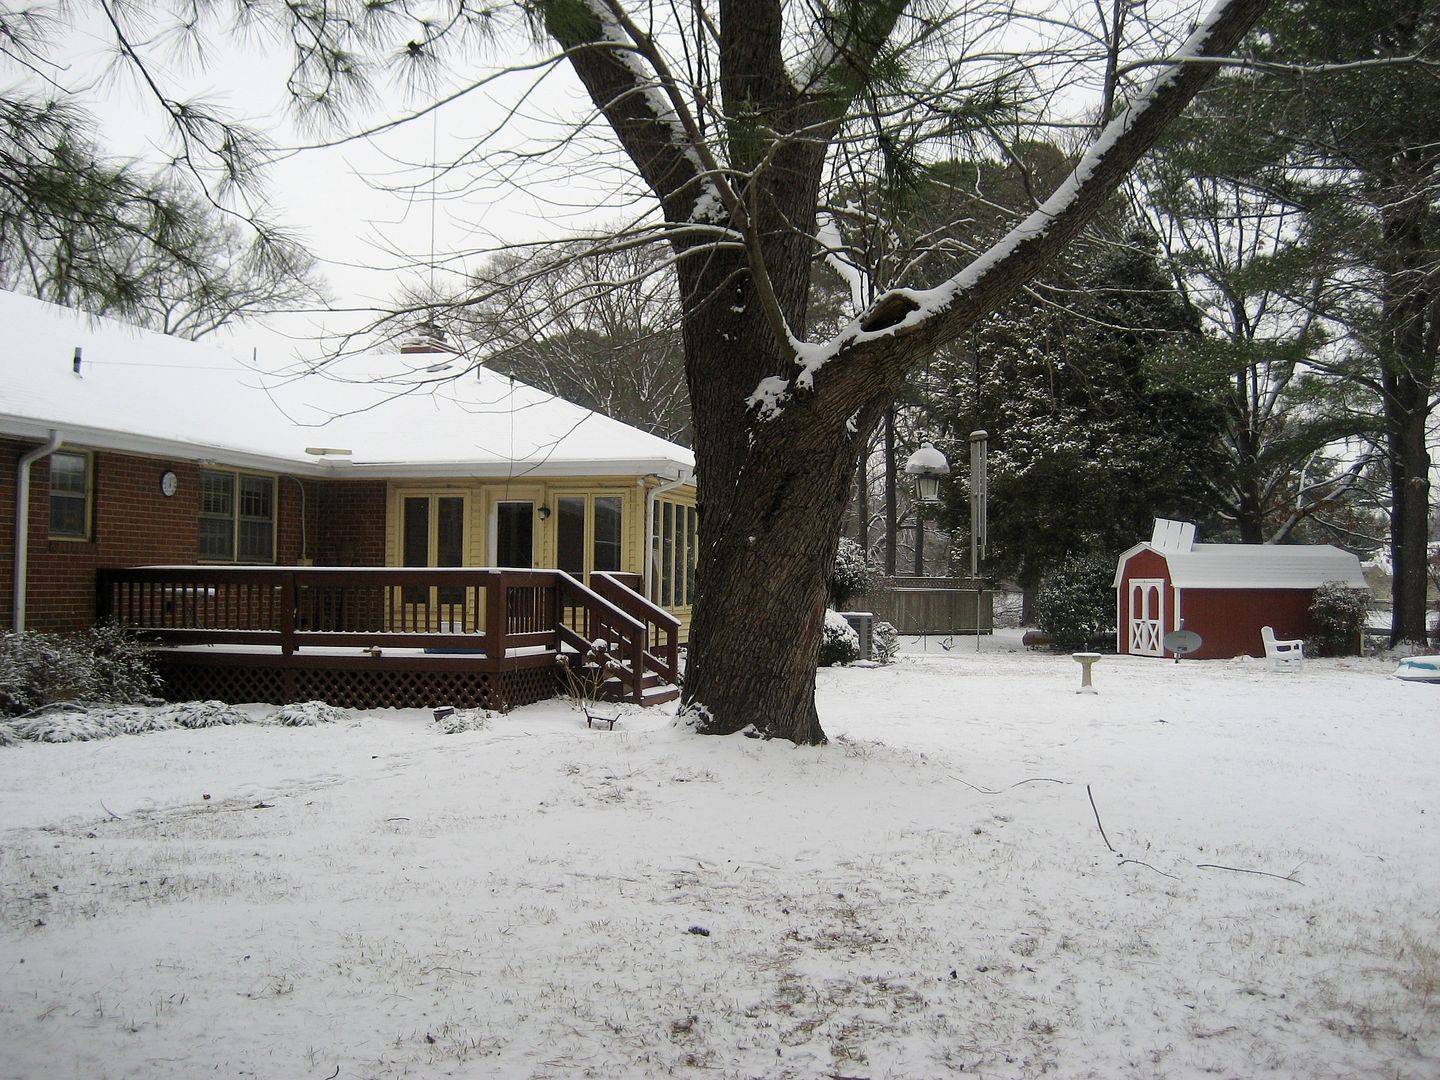 A view of the backyard